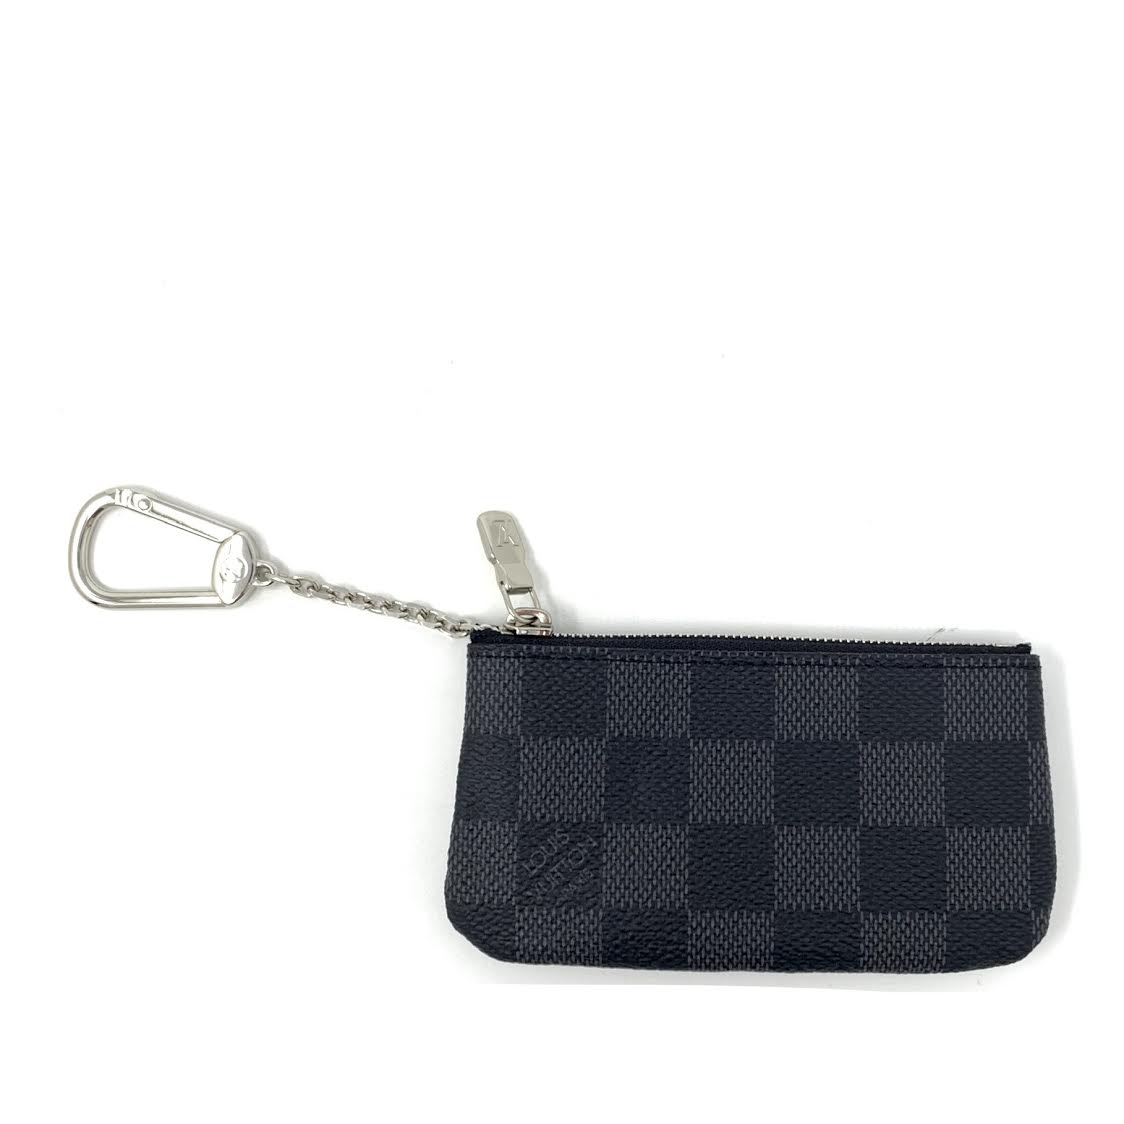 Louis Vuitton - Authenticated Key Pouch Small Bag - Leather Grey for Men, Very Good Condition